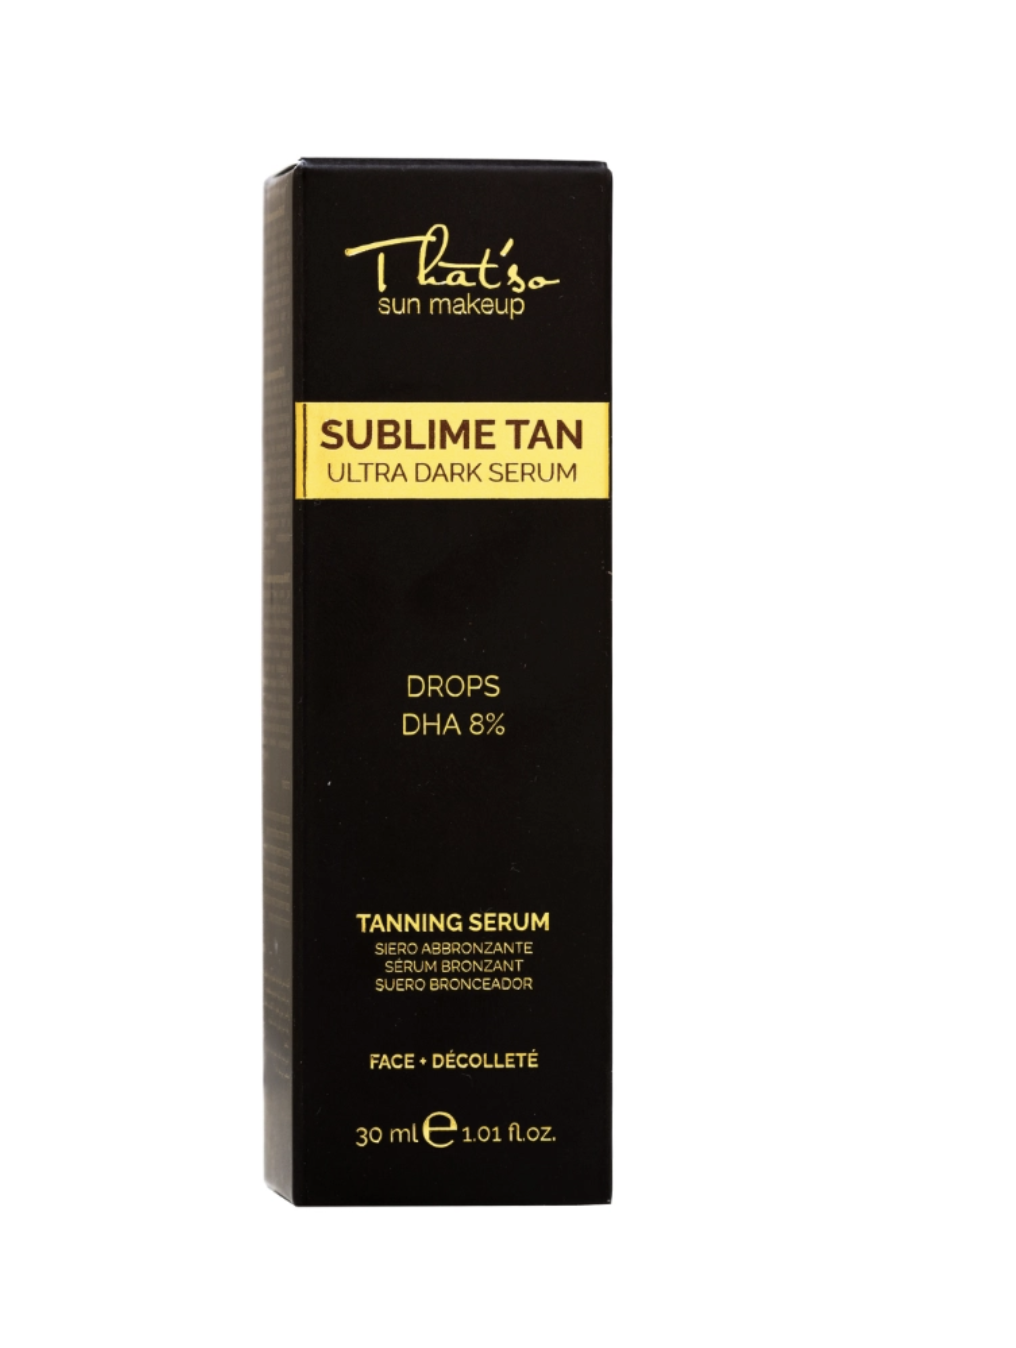 2 Sublime tan - That'so